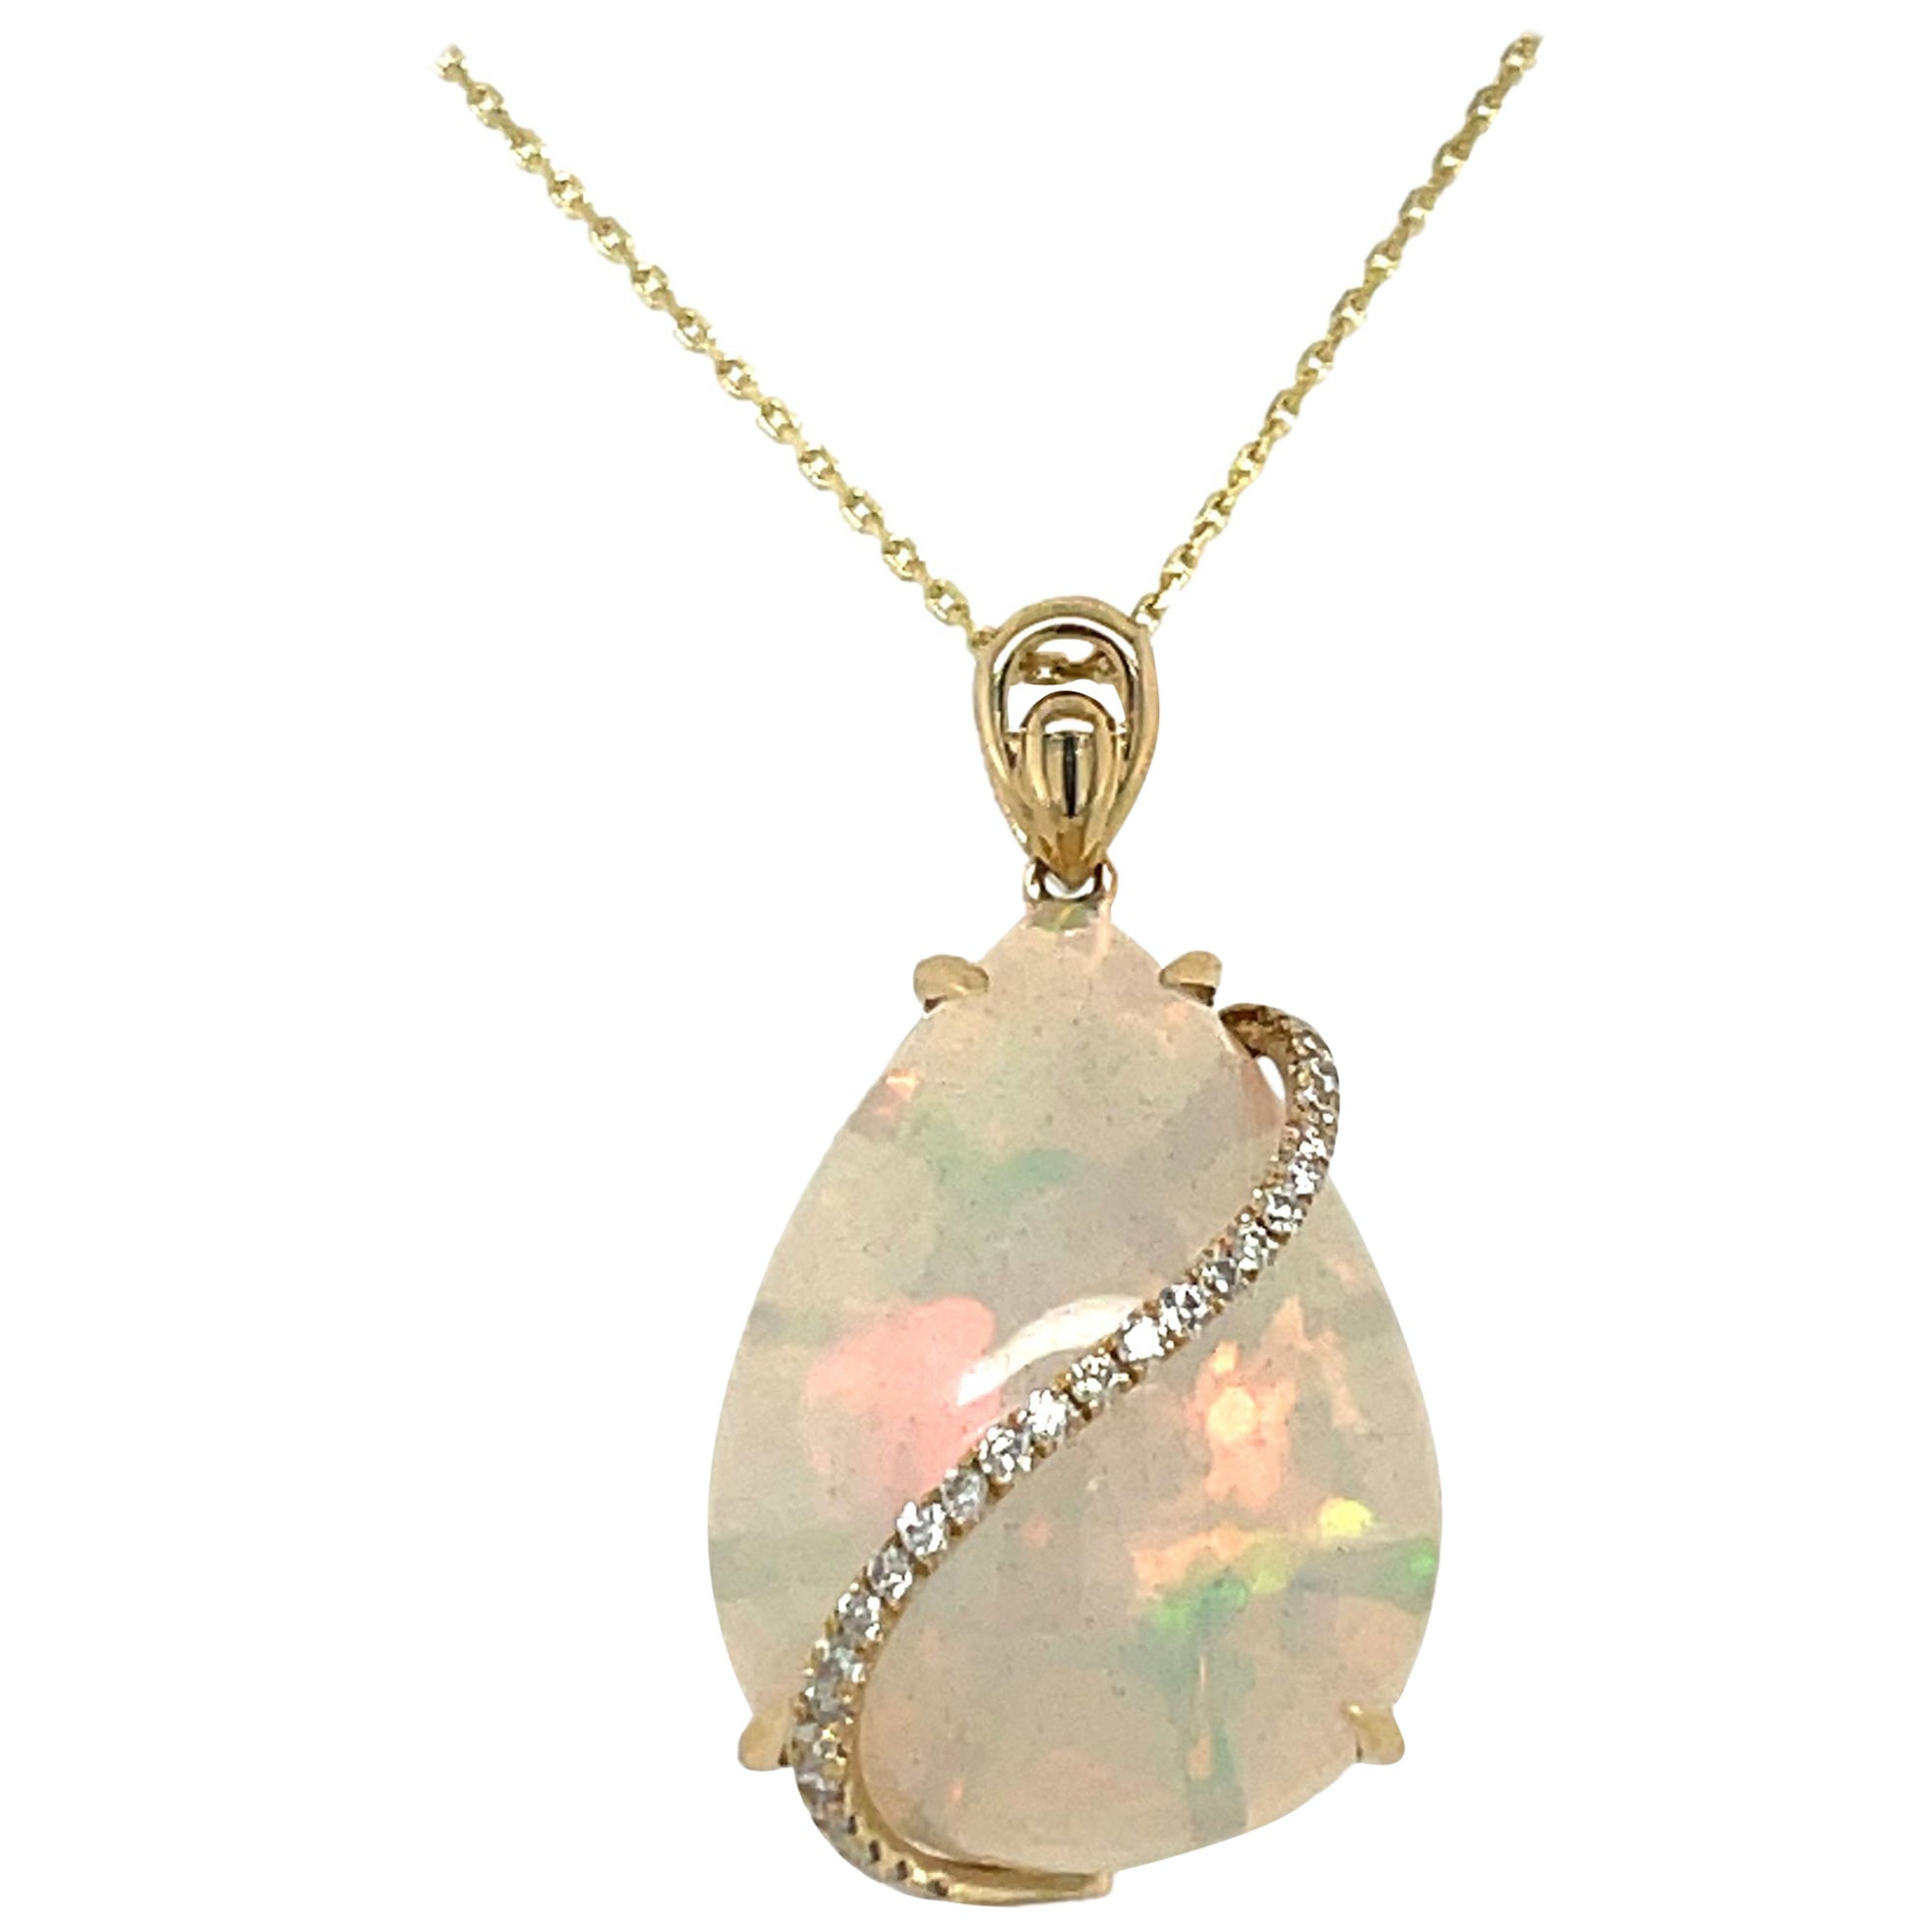 12.8 ct Ethiopian Opal and Diamond Pendant in 14KY Gold 